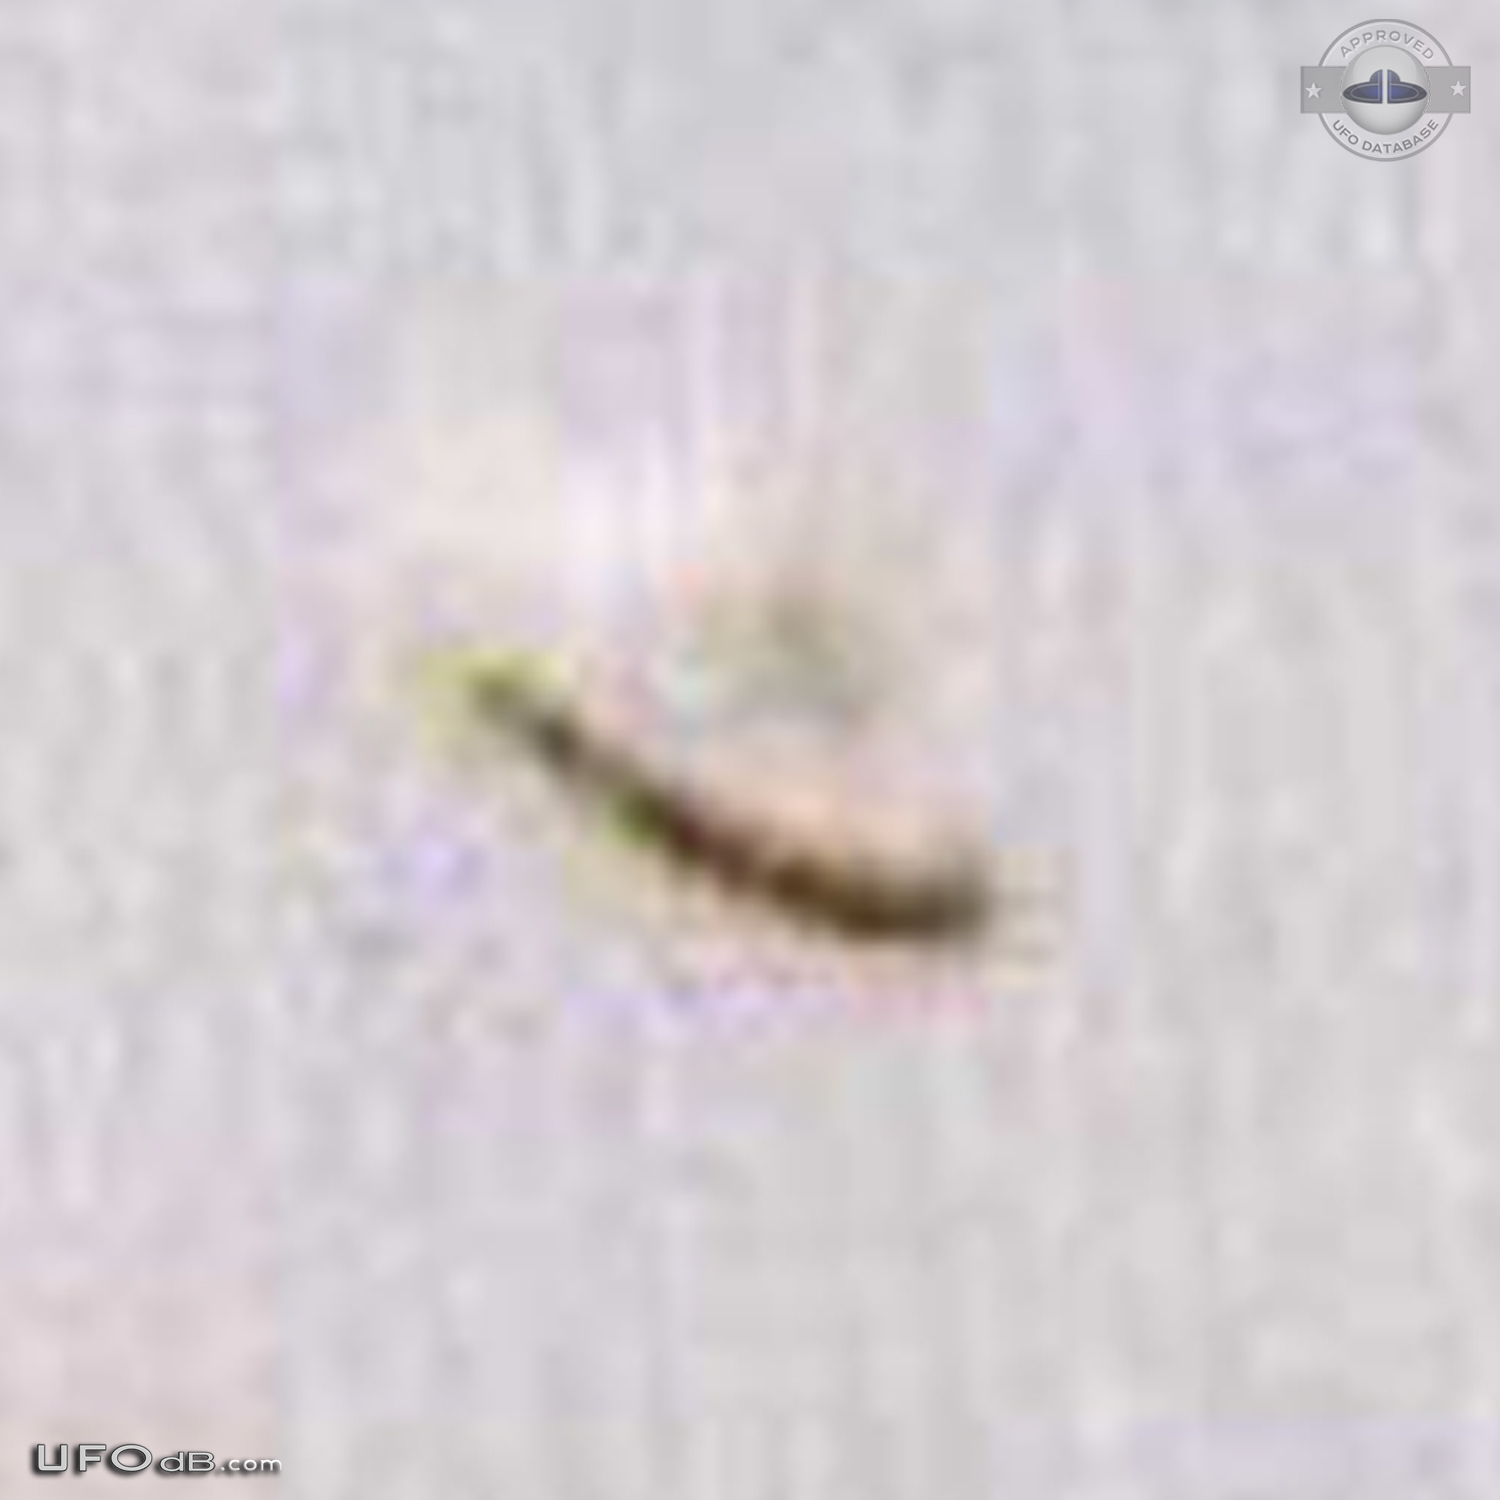 1967 Peru UFO sighting caught on pictures Huaylas Valley Yungay Ancash UFO Picture #440-7